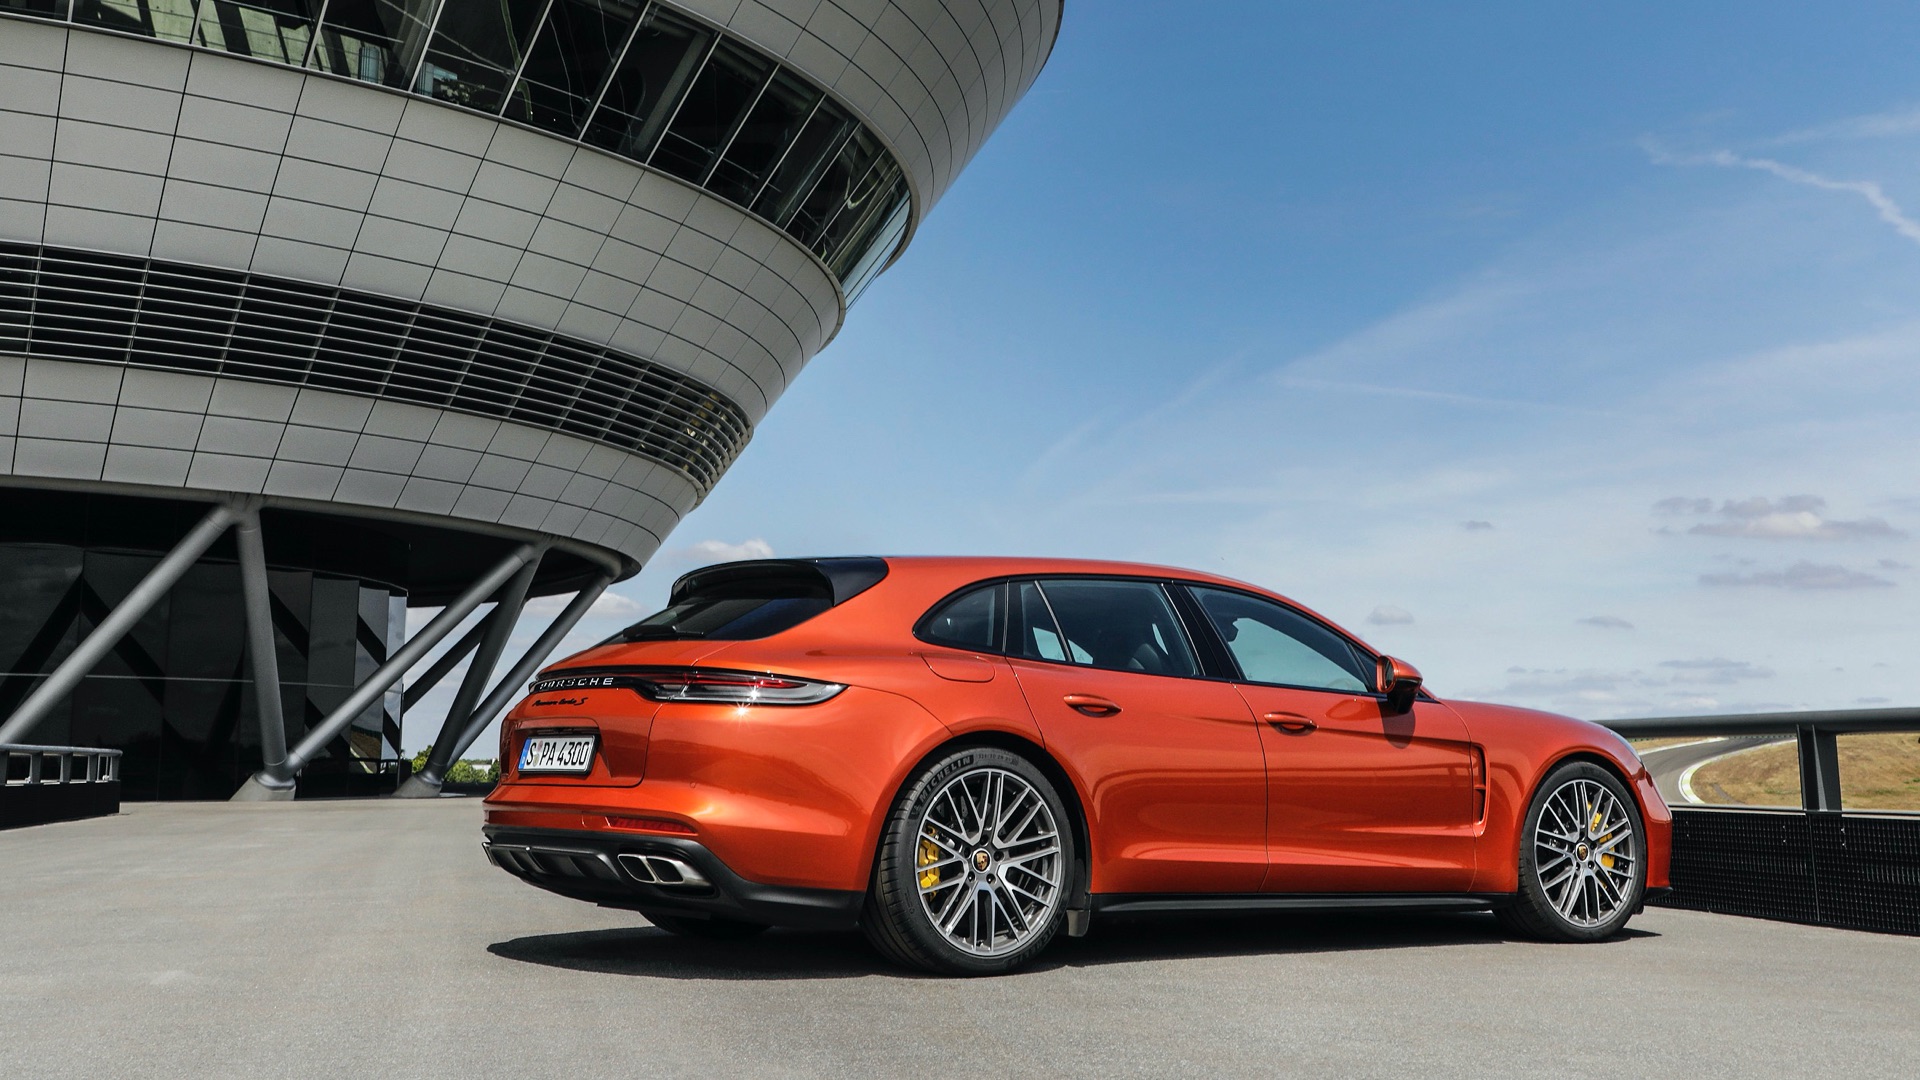 2020 Porsche Panamera Gets Facelift and Revised Chassis - GTspirit